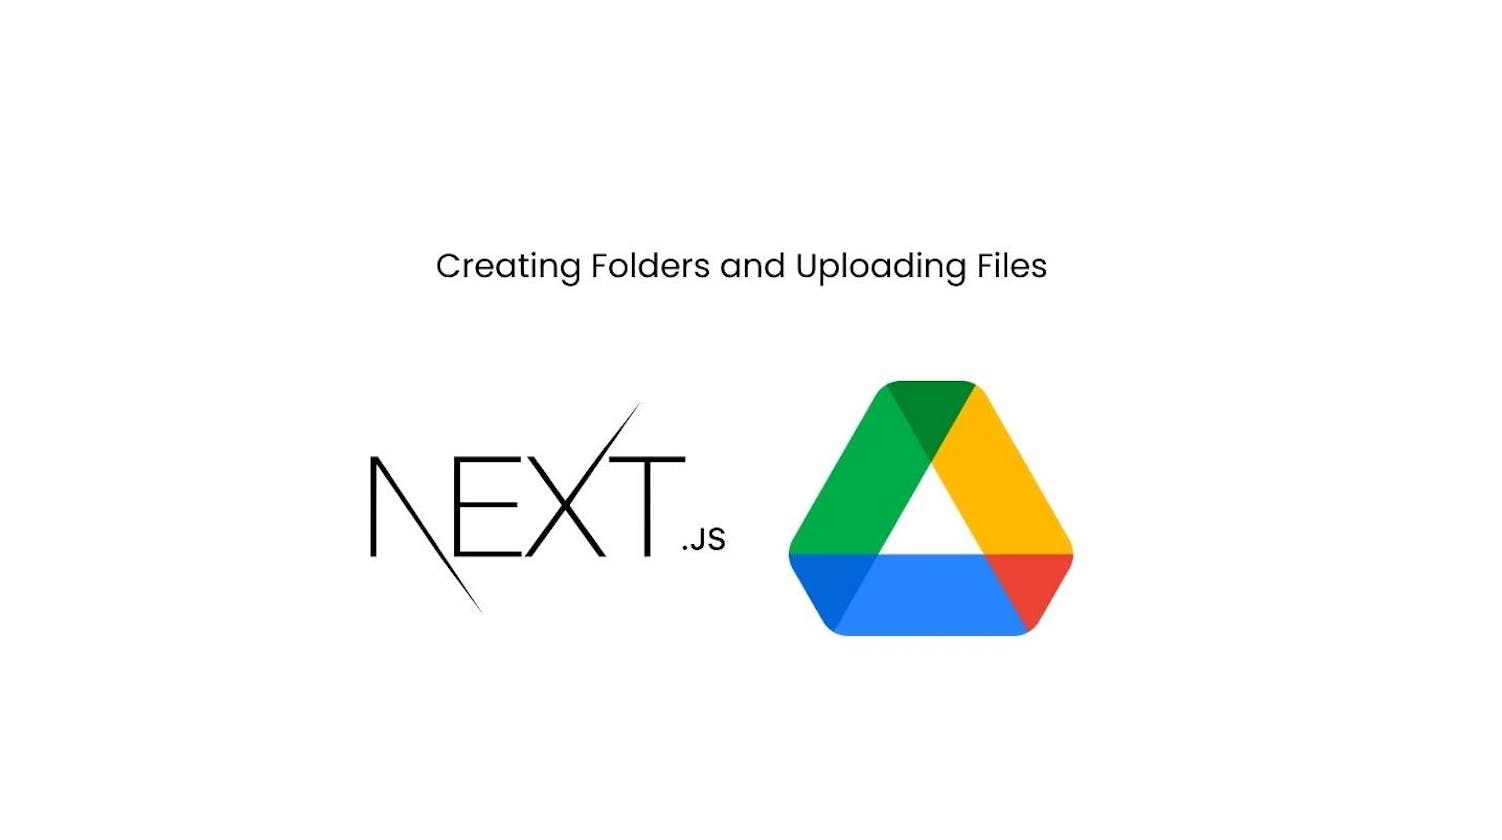 Uploading folders and files to Shared Drives using Next.js API route handlers